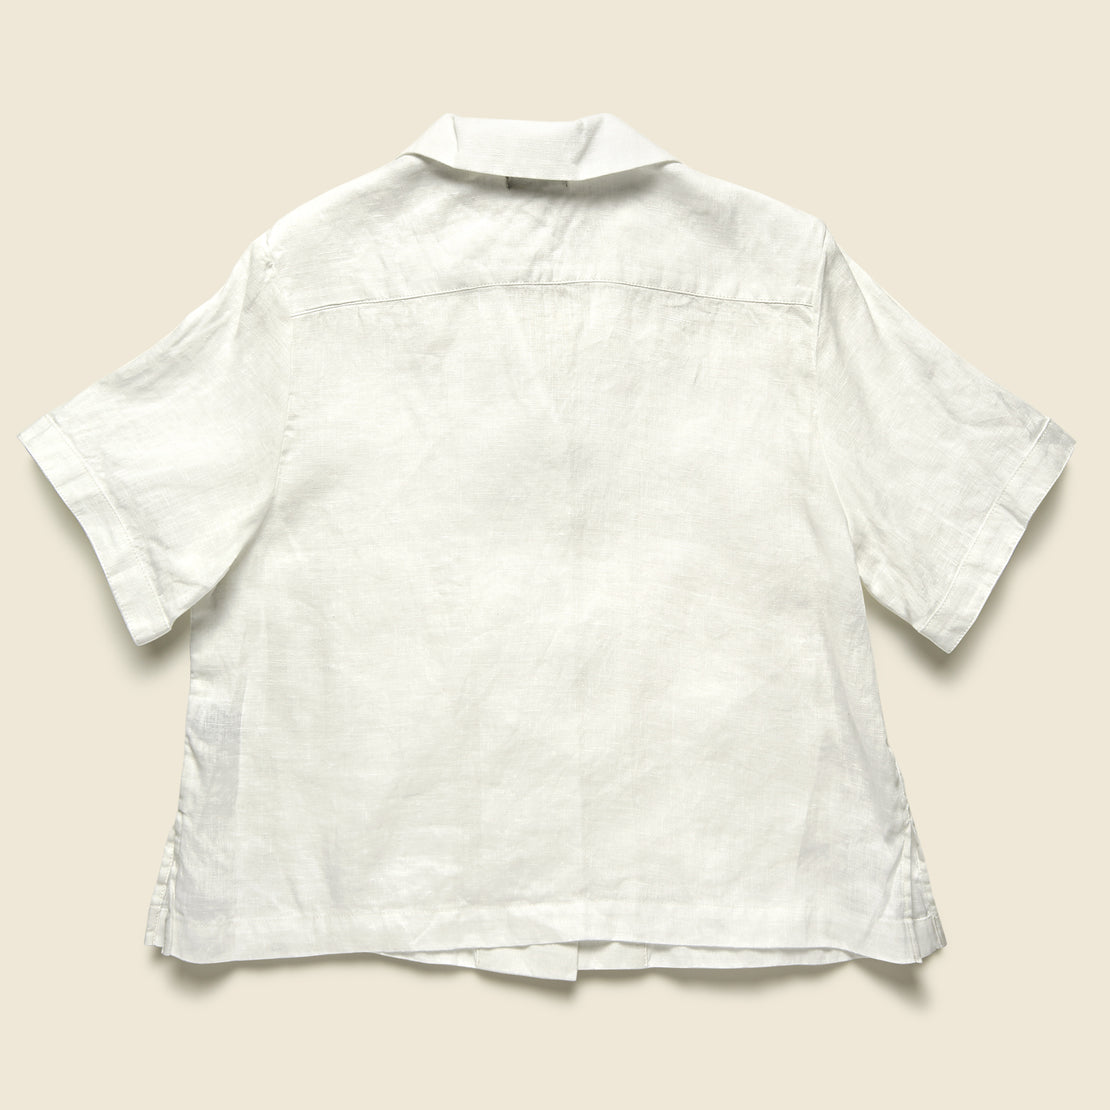 Front Pocket Shirt - White - Fog Linen - STAG Provisions - W - Tops - S/S Woven